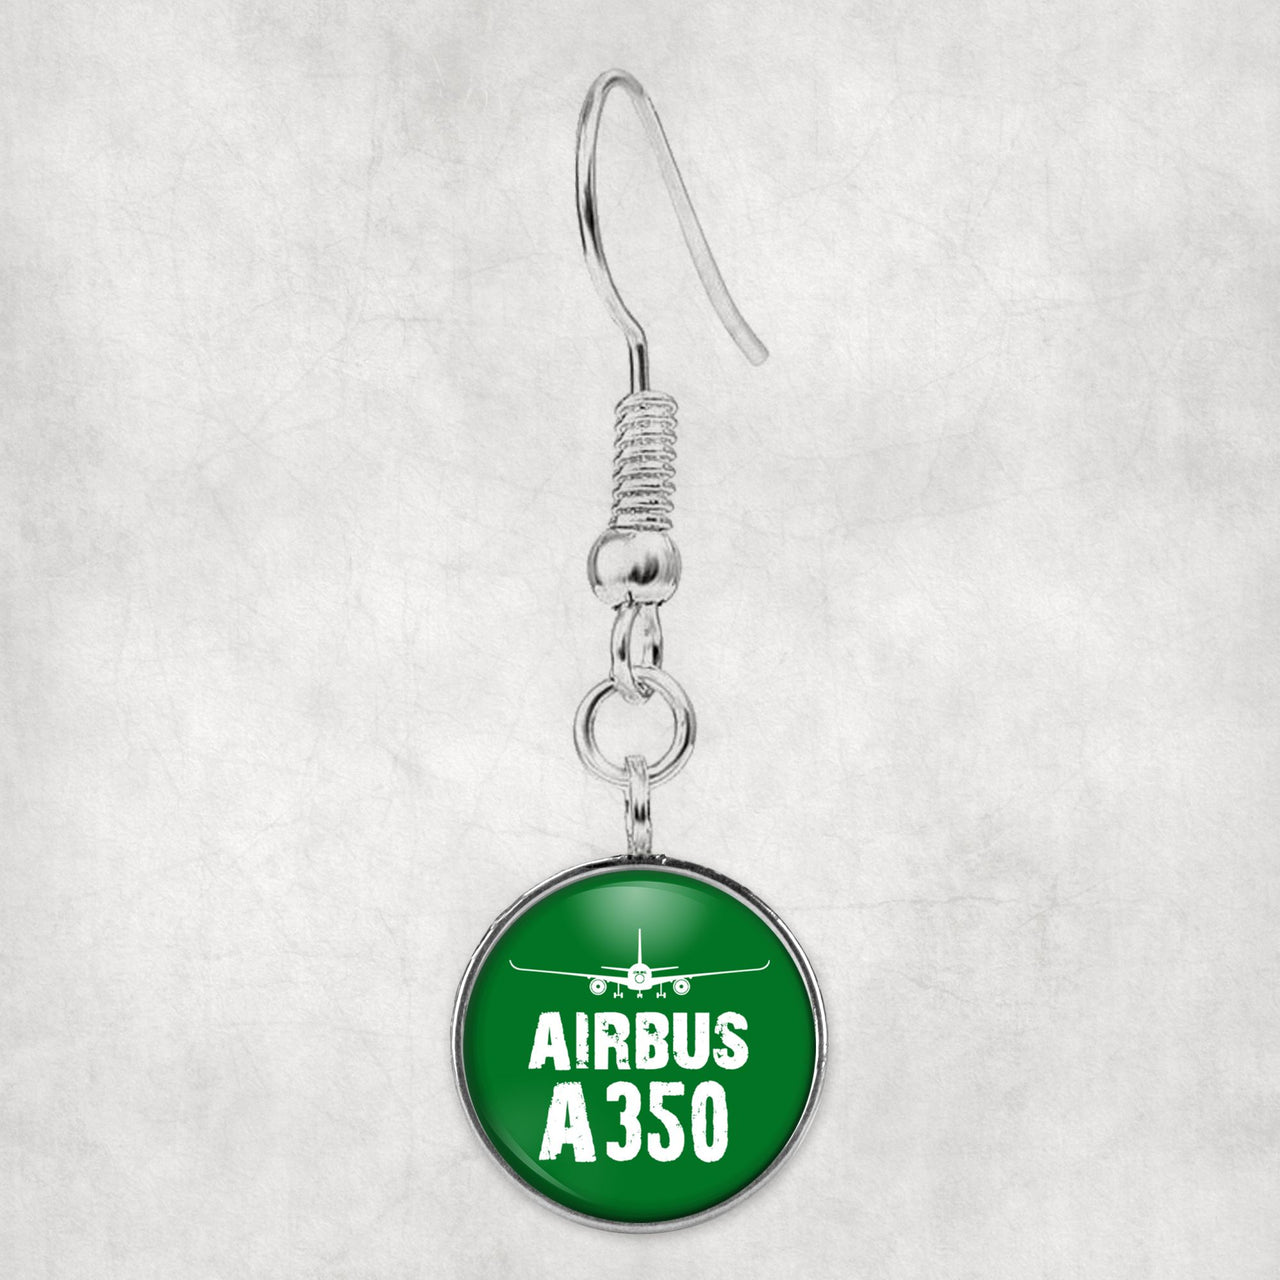 Airbus A350 & Plane Designed Earrings